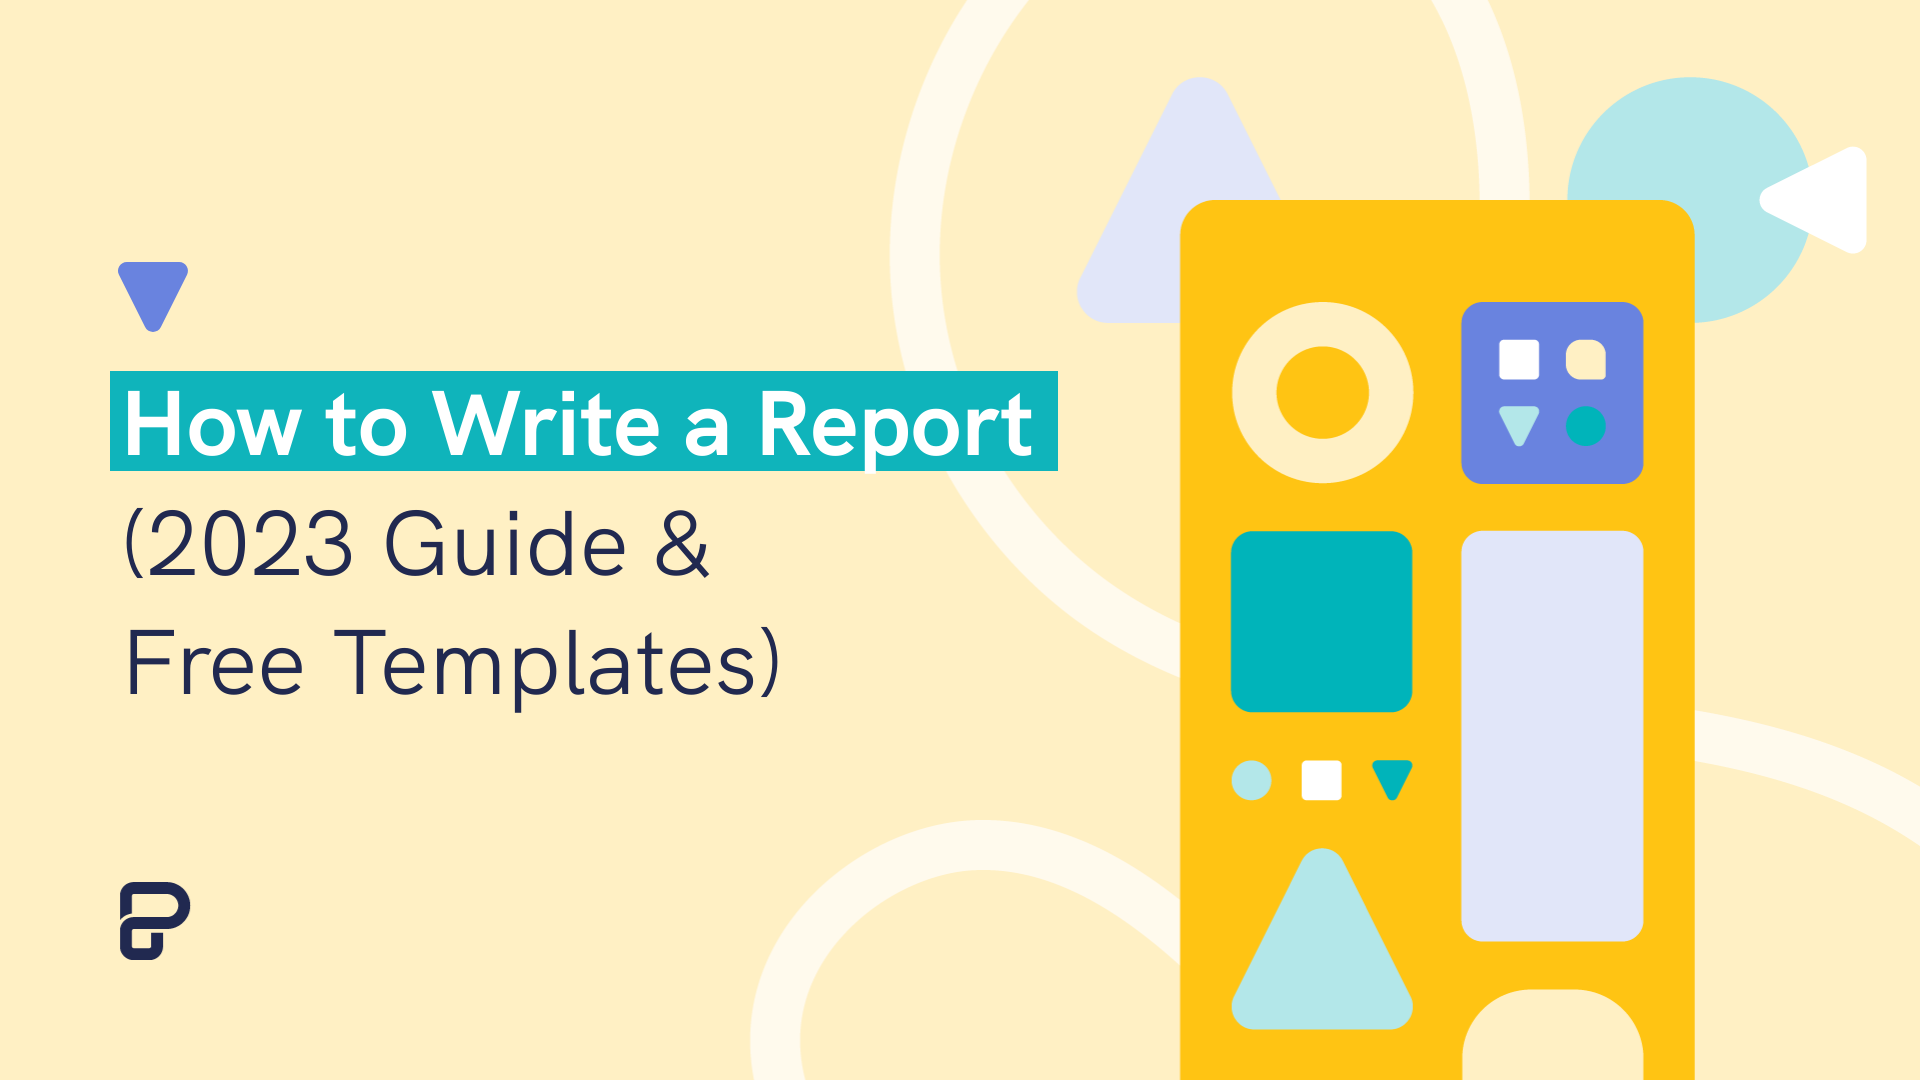 how to write a report, 2023 guide on how to write a report plus free templates